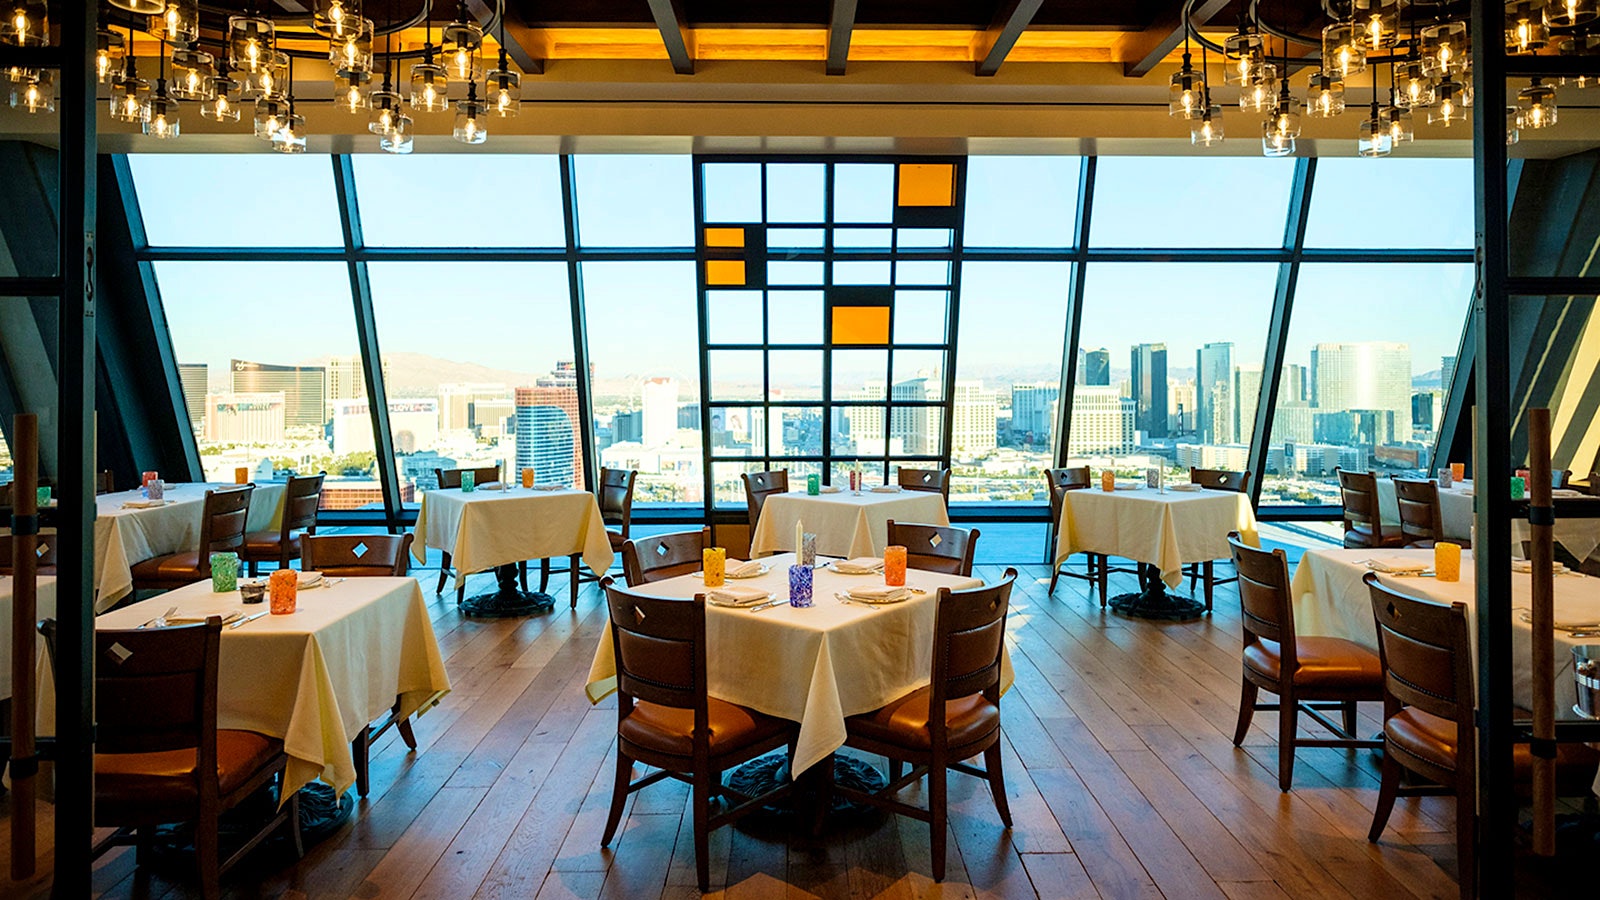  The dining room of the original Vetri Cucina, with large windows allowing views out over the city of LasVegas from the 56th floor of the Palm Casino Resort